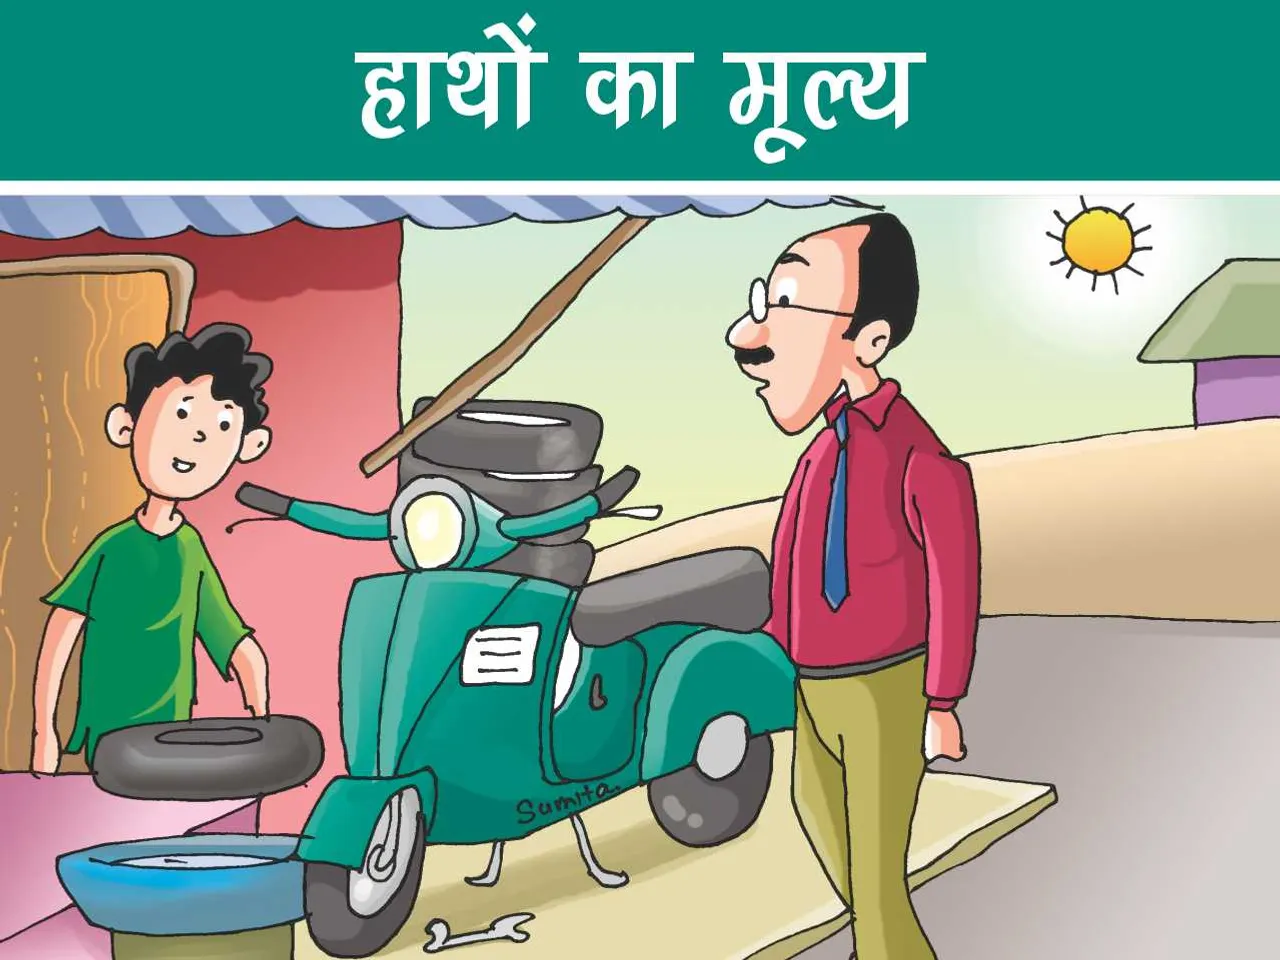 Man With Scooter at Puncture shop cartoon image